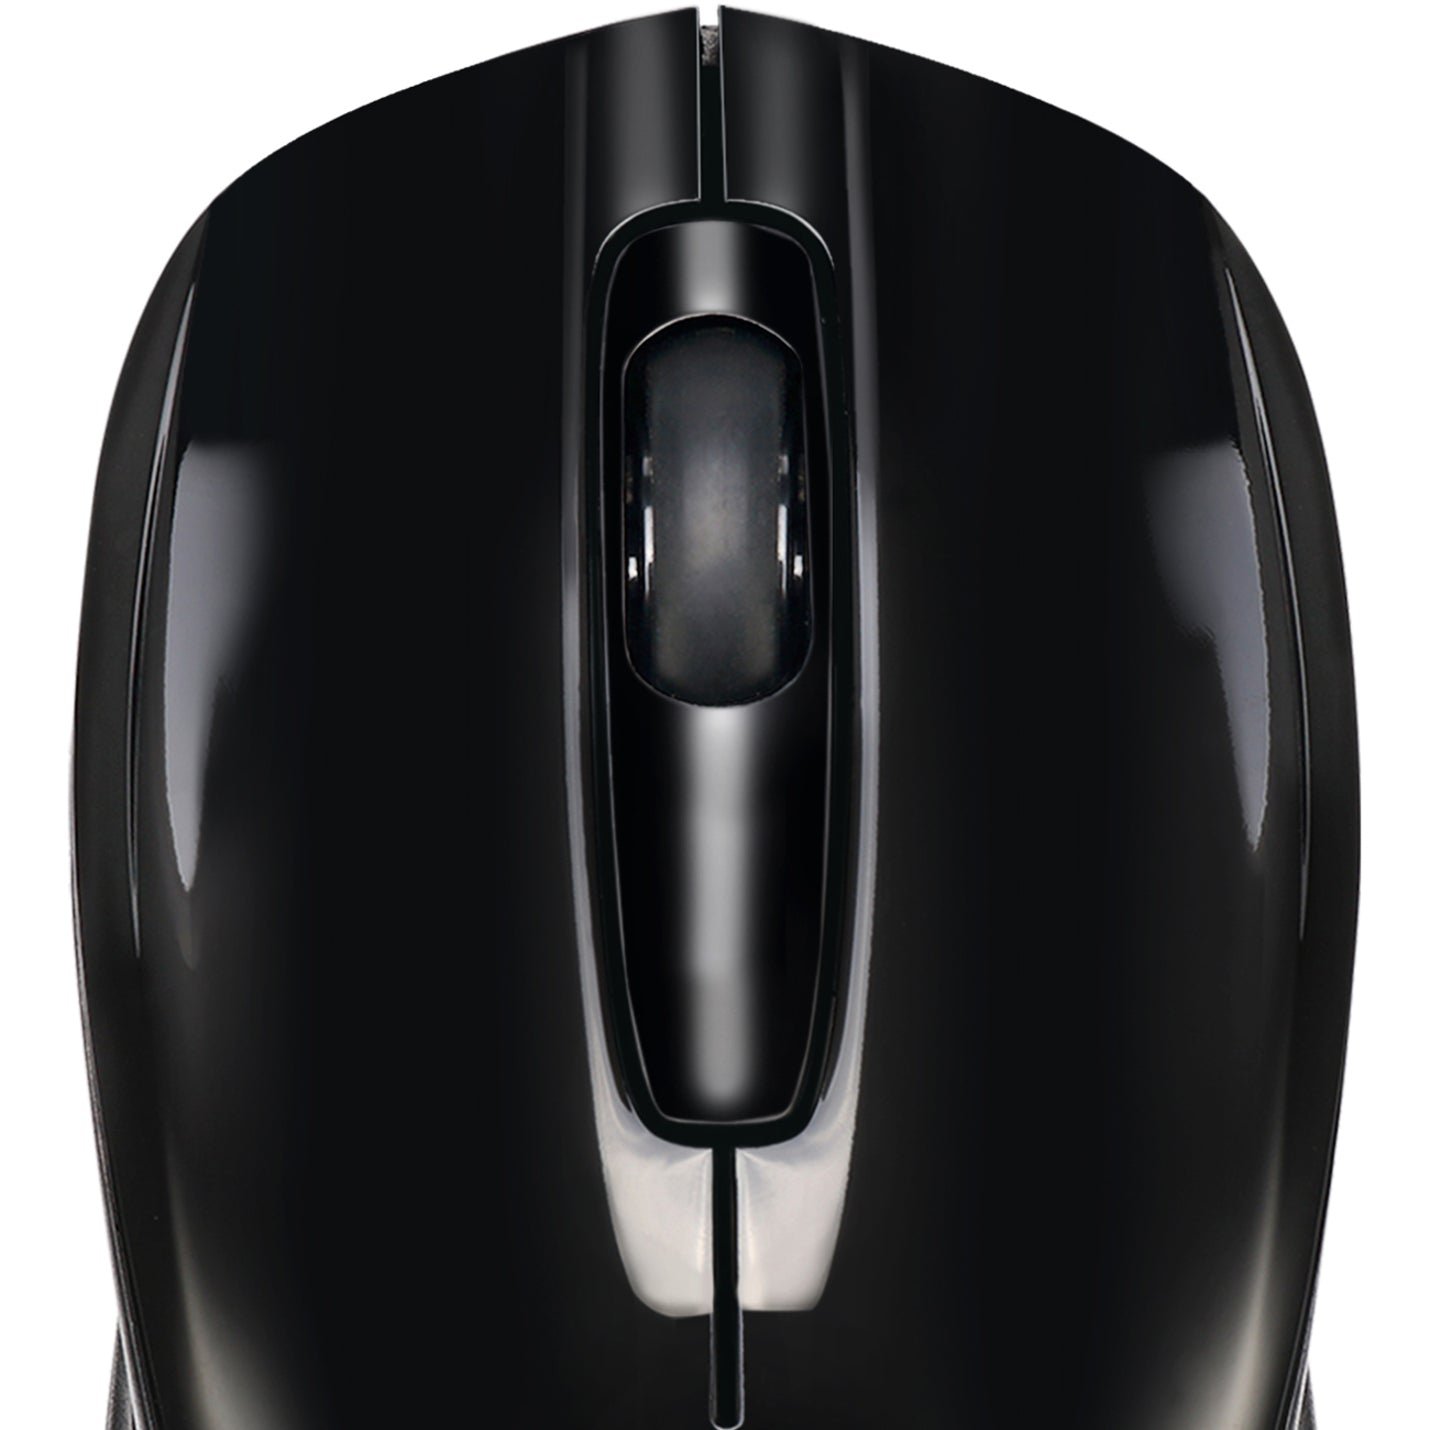 Adesso IMOUSES50 iMouse S50 - 2.4GHz Wireless Mini Mouse, Ergonomic Fit, 1200 dpi, Black